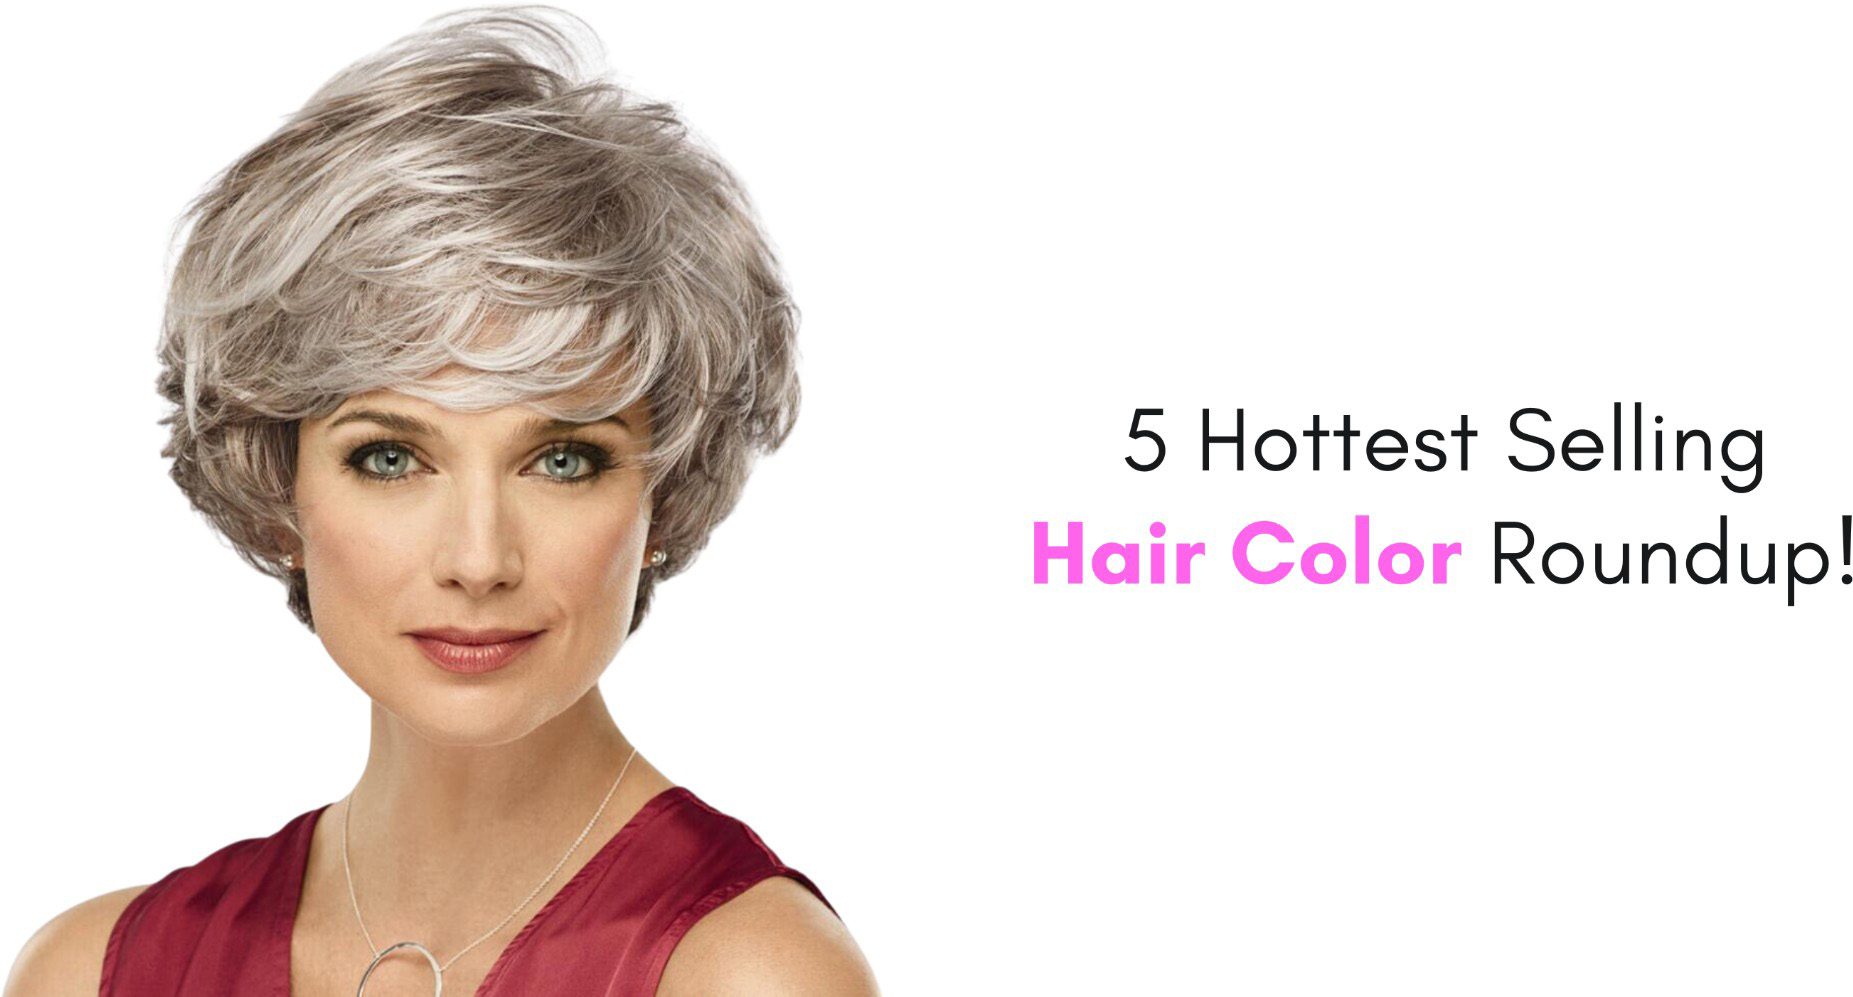 5 Hottest Selling Hair Color Roundup!